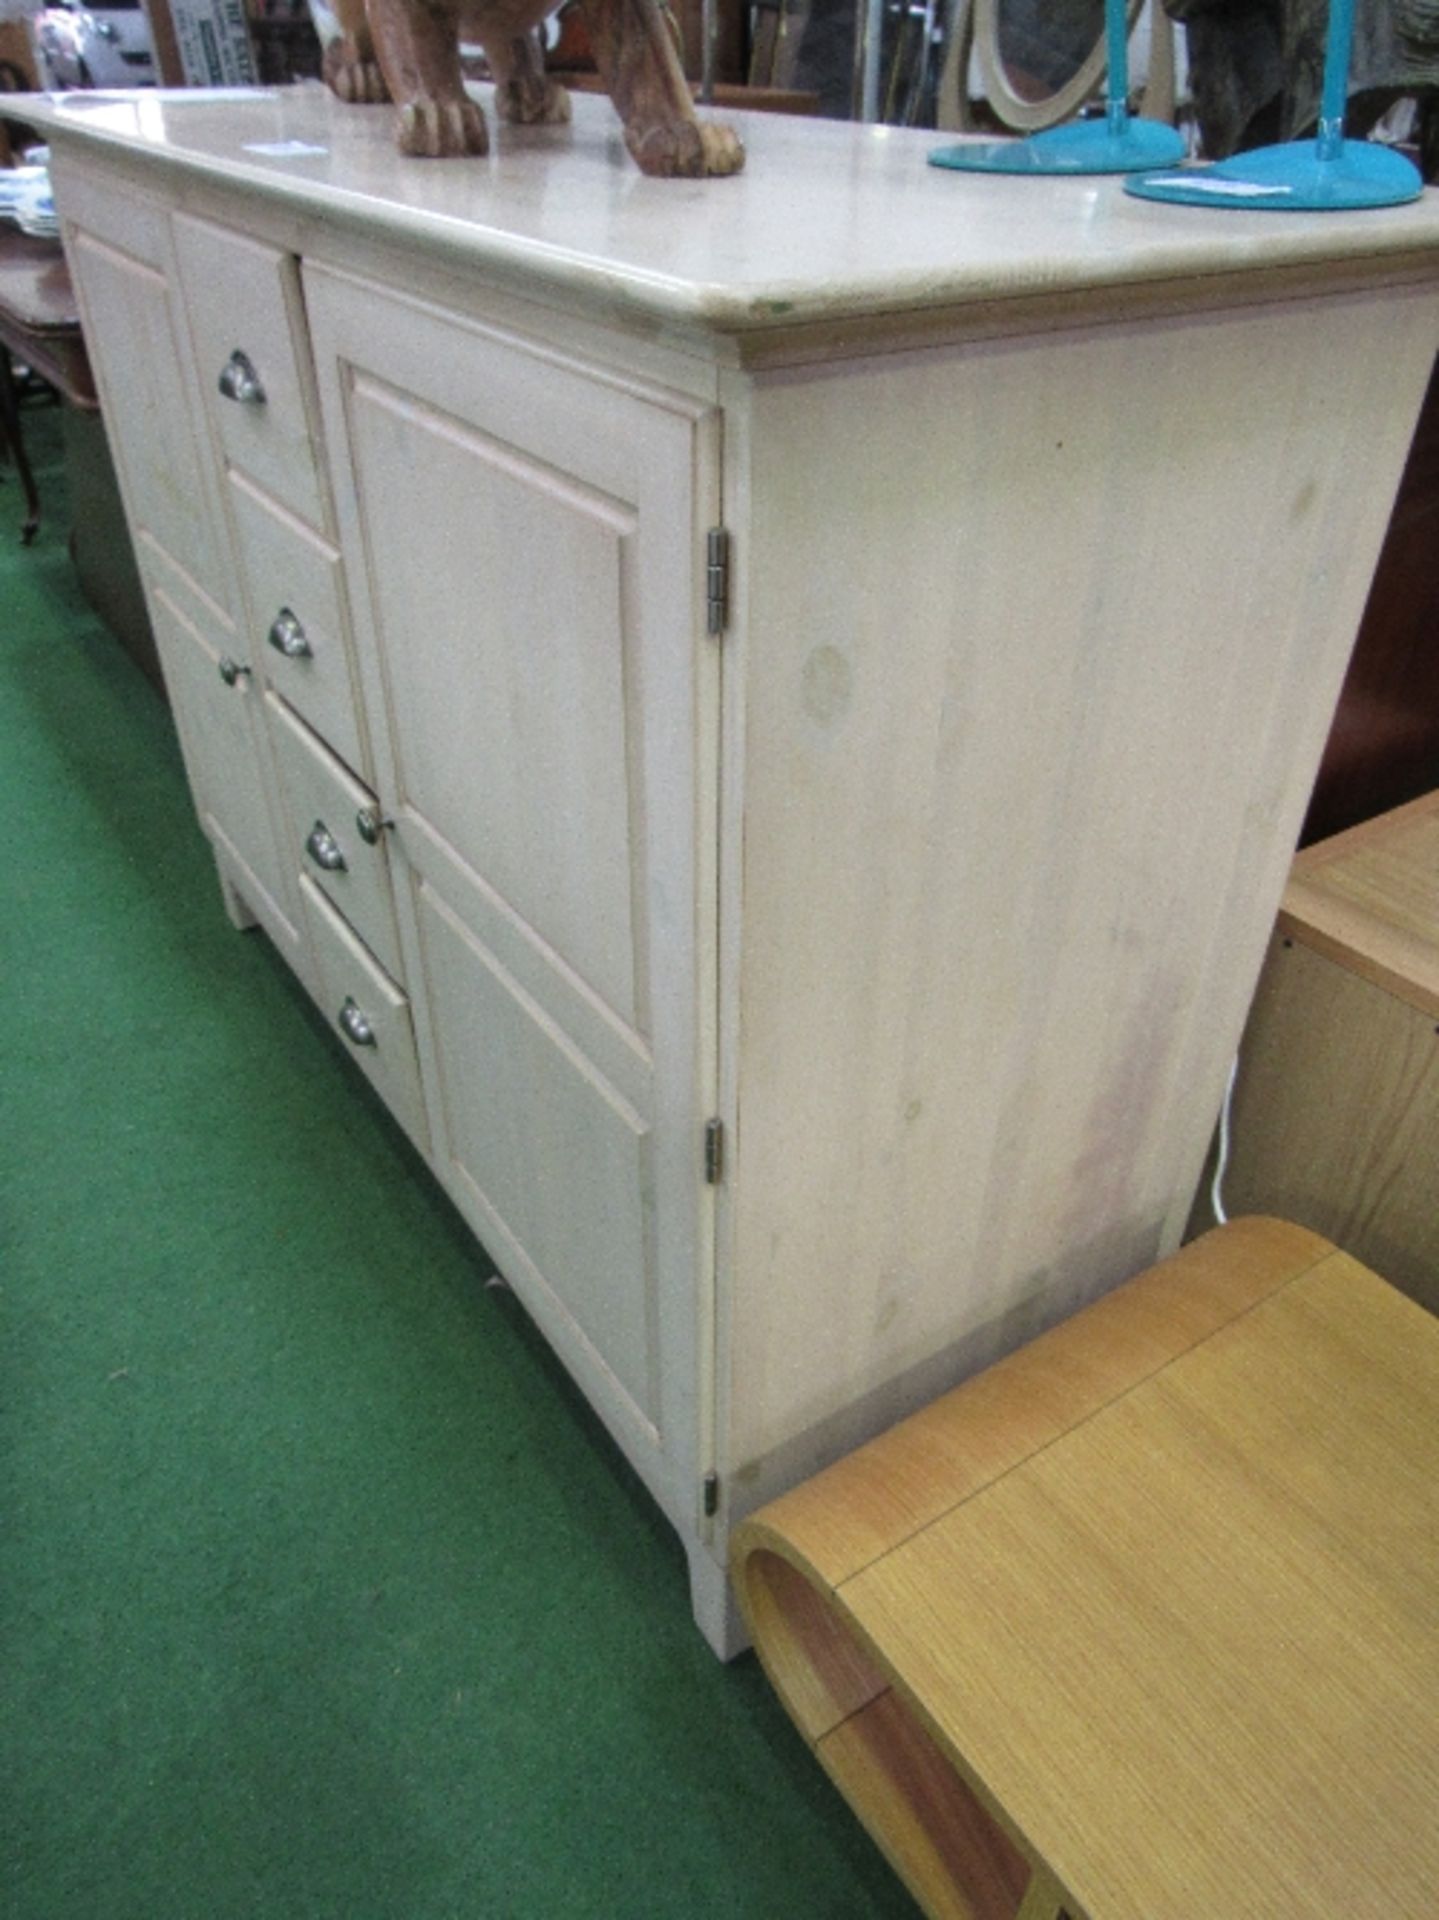 Ducal painted pine cabinet with cupboards either side of 4 drawers, 53" x 21" x 39" high - Image 2 of 3